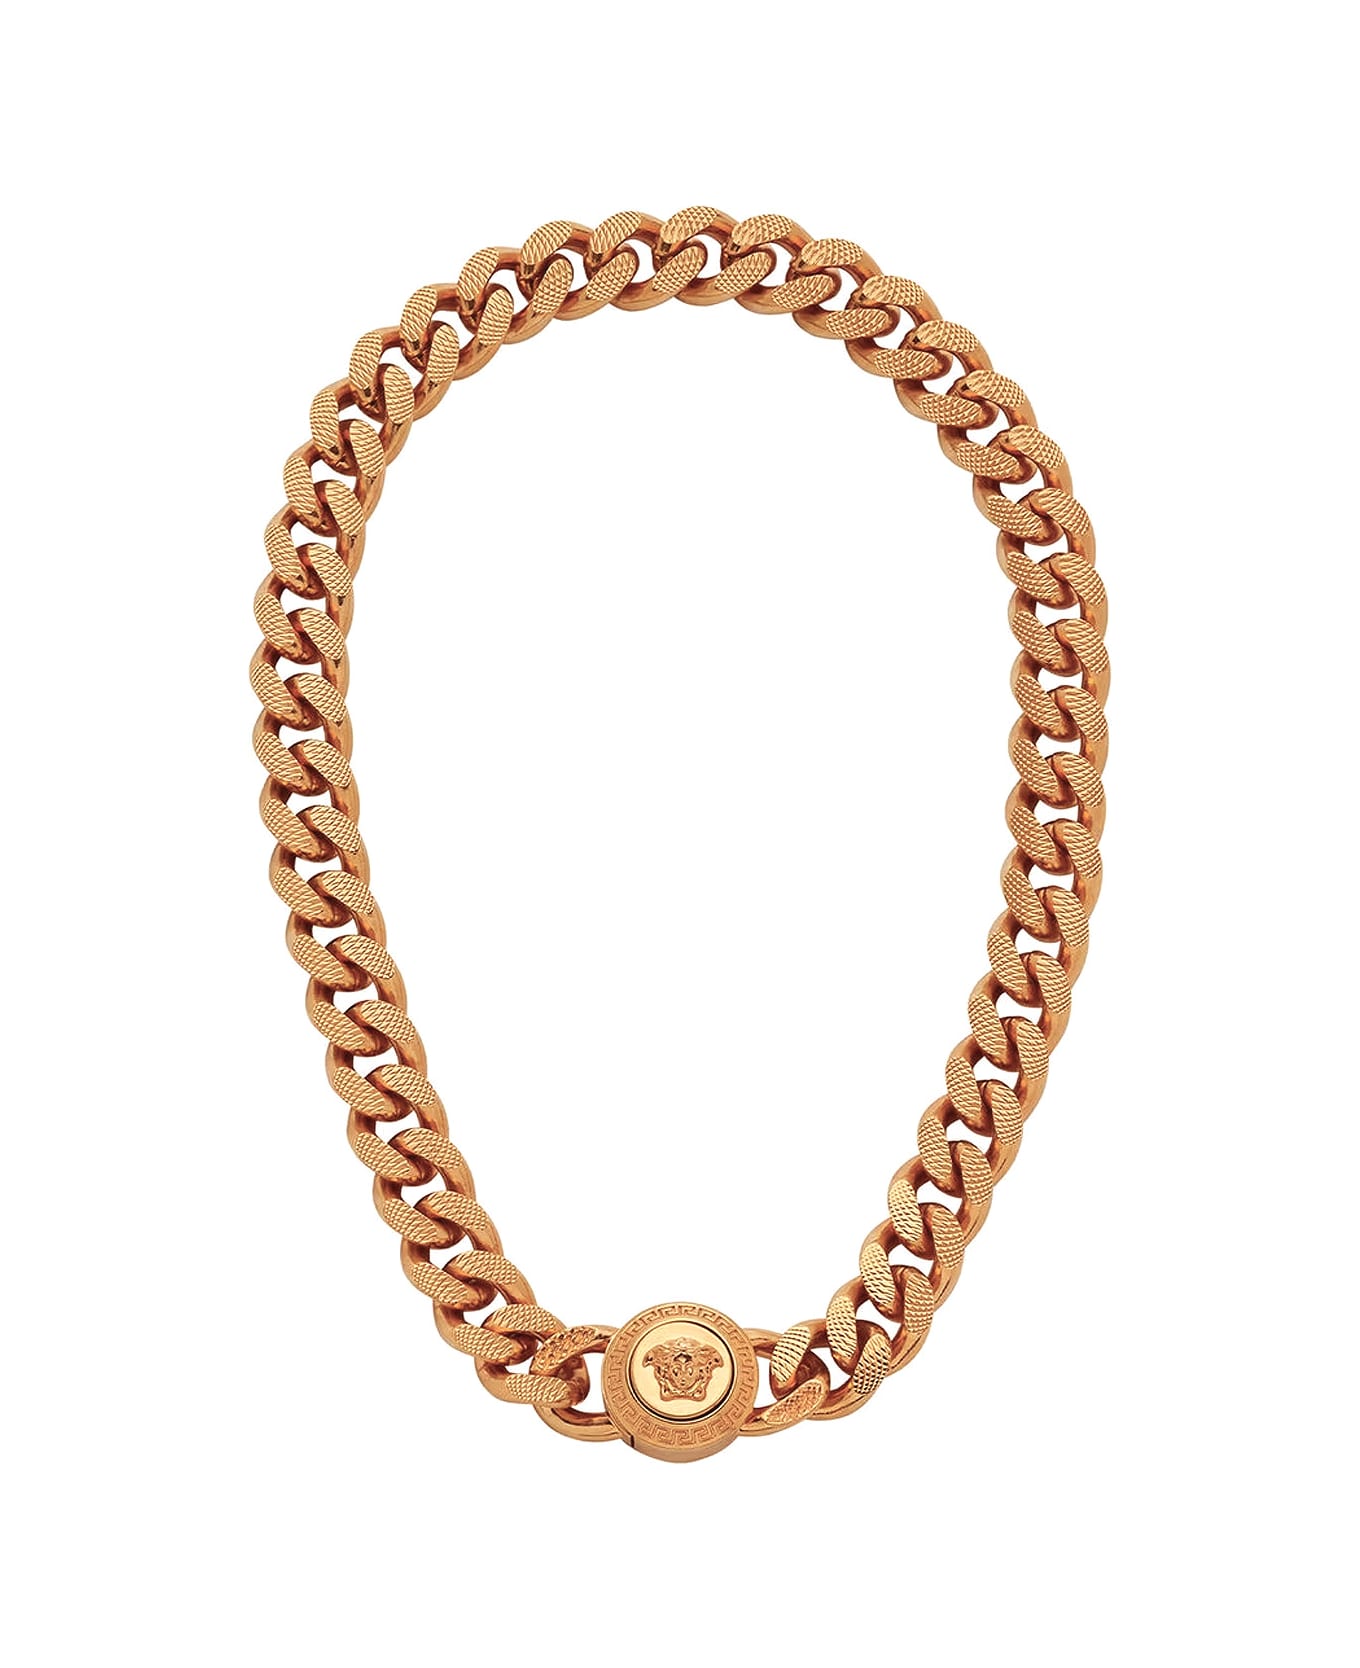 Versace Necklace - Gold